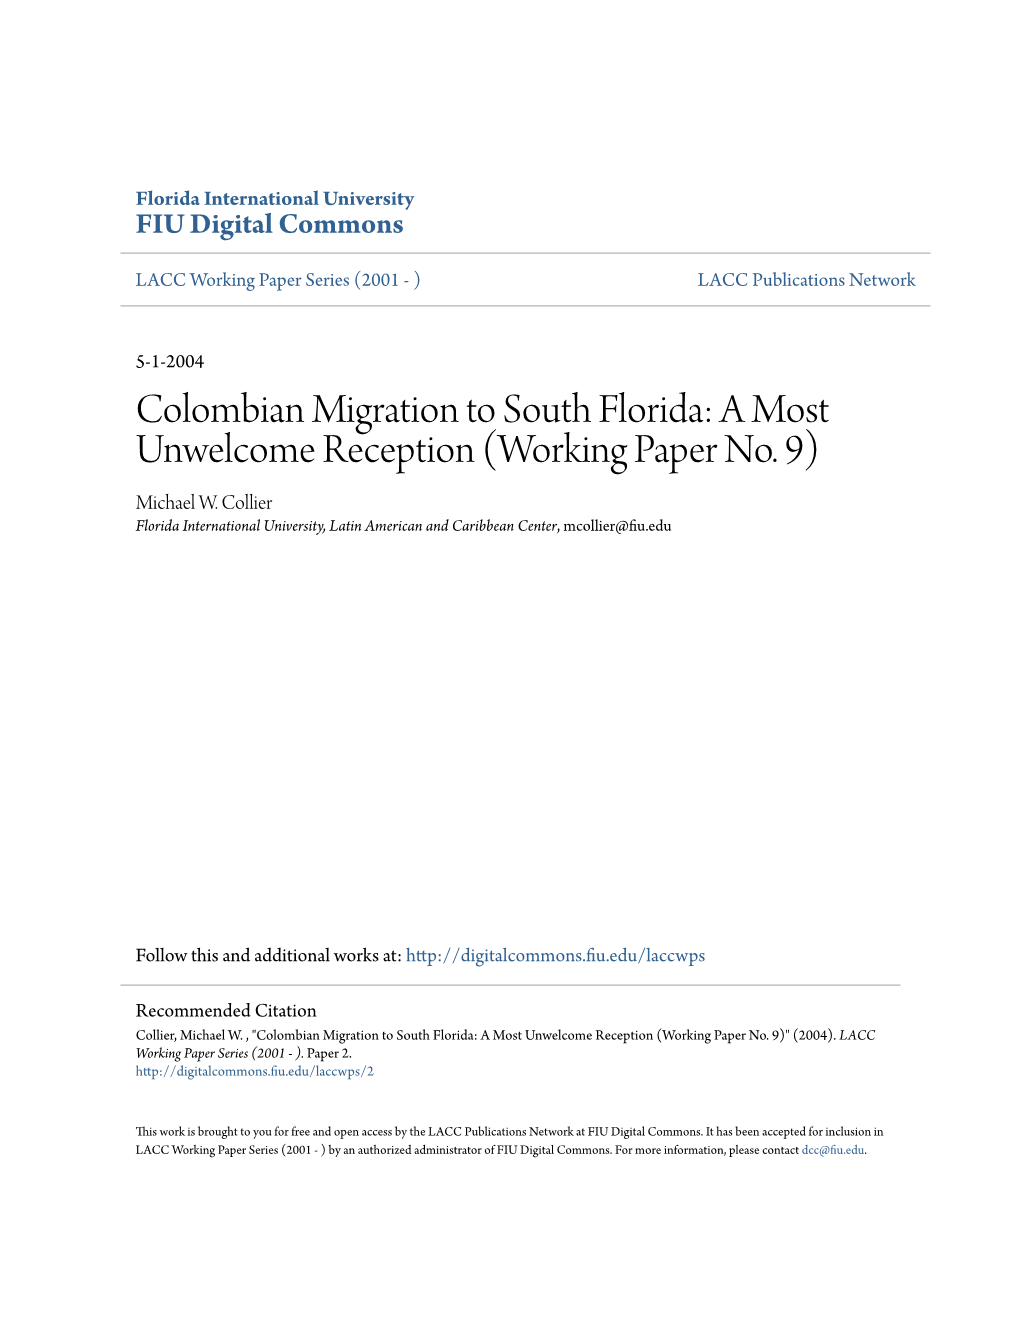 Colombian Migration to South Florida: a Most Unwelcome Reception (Working Paper No